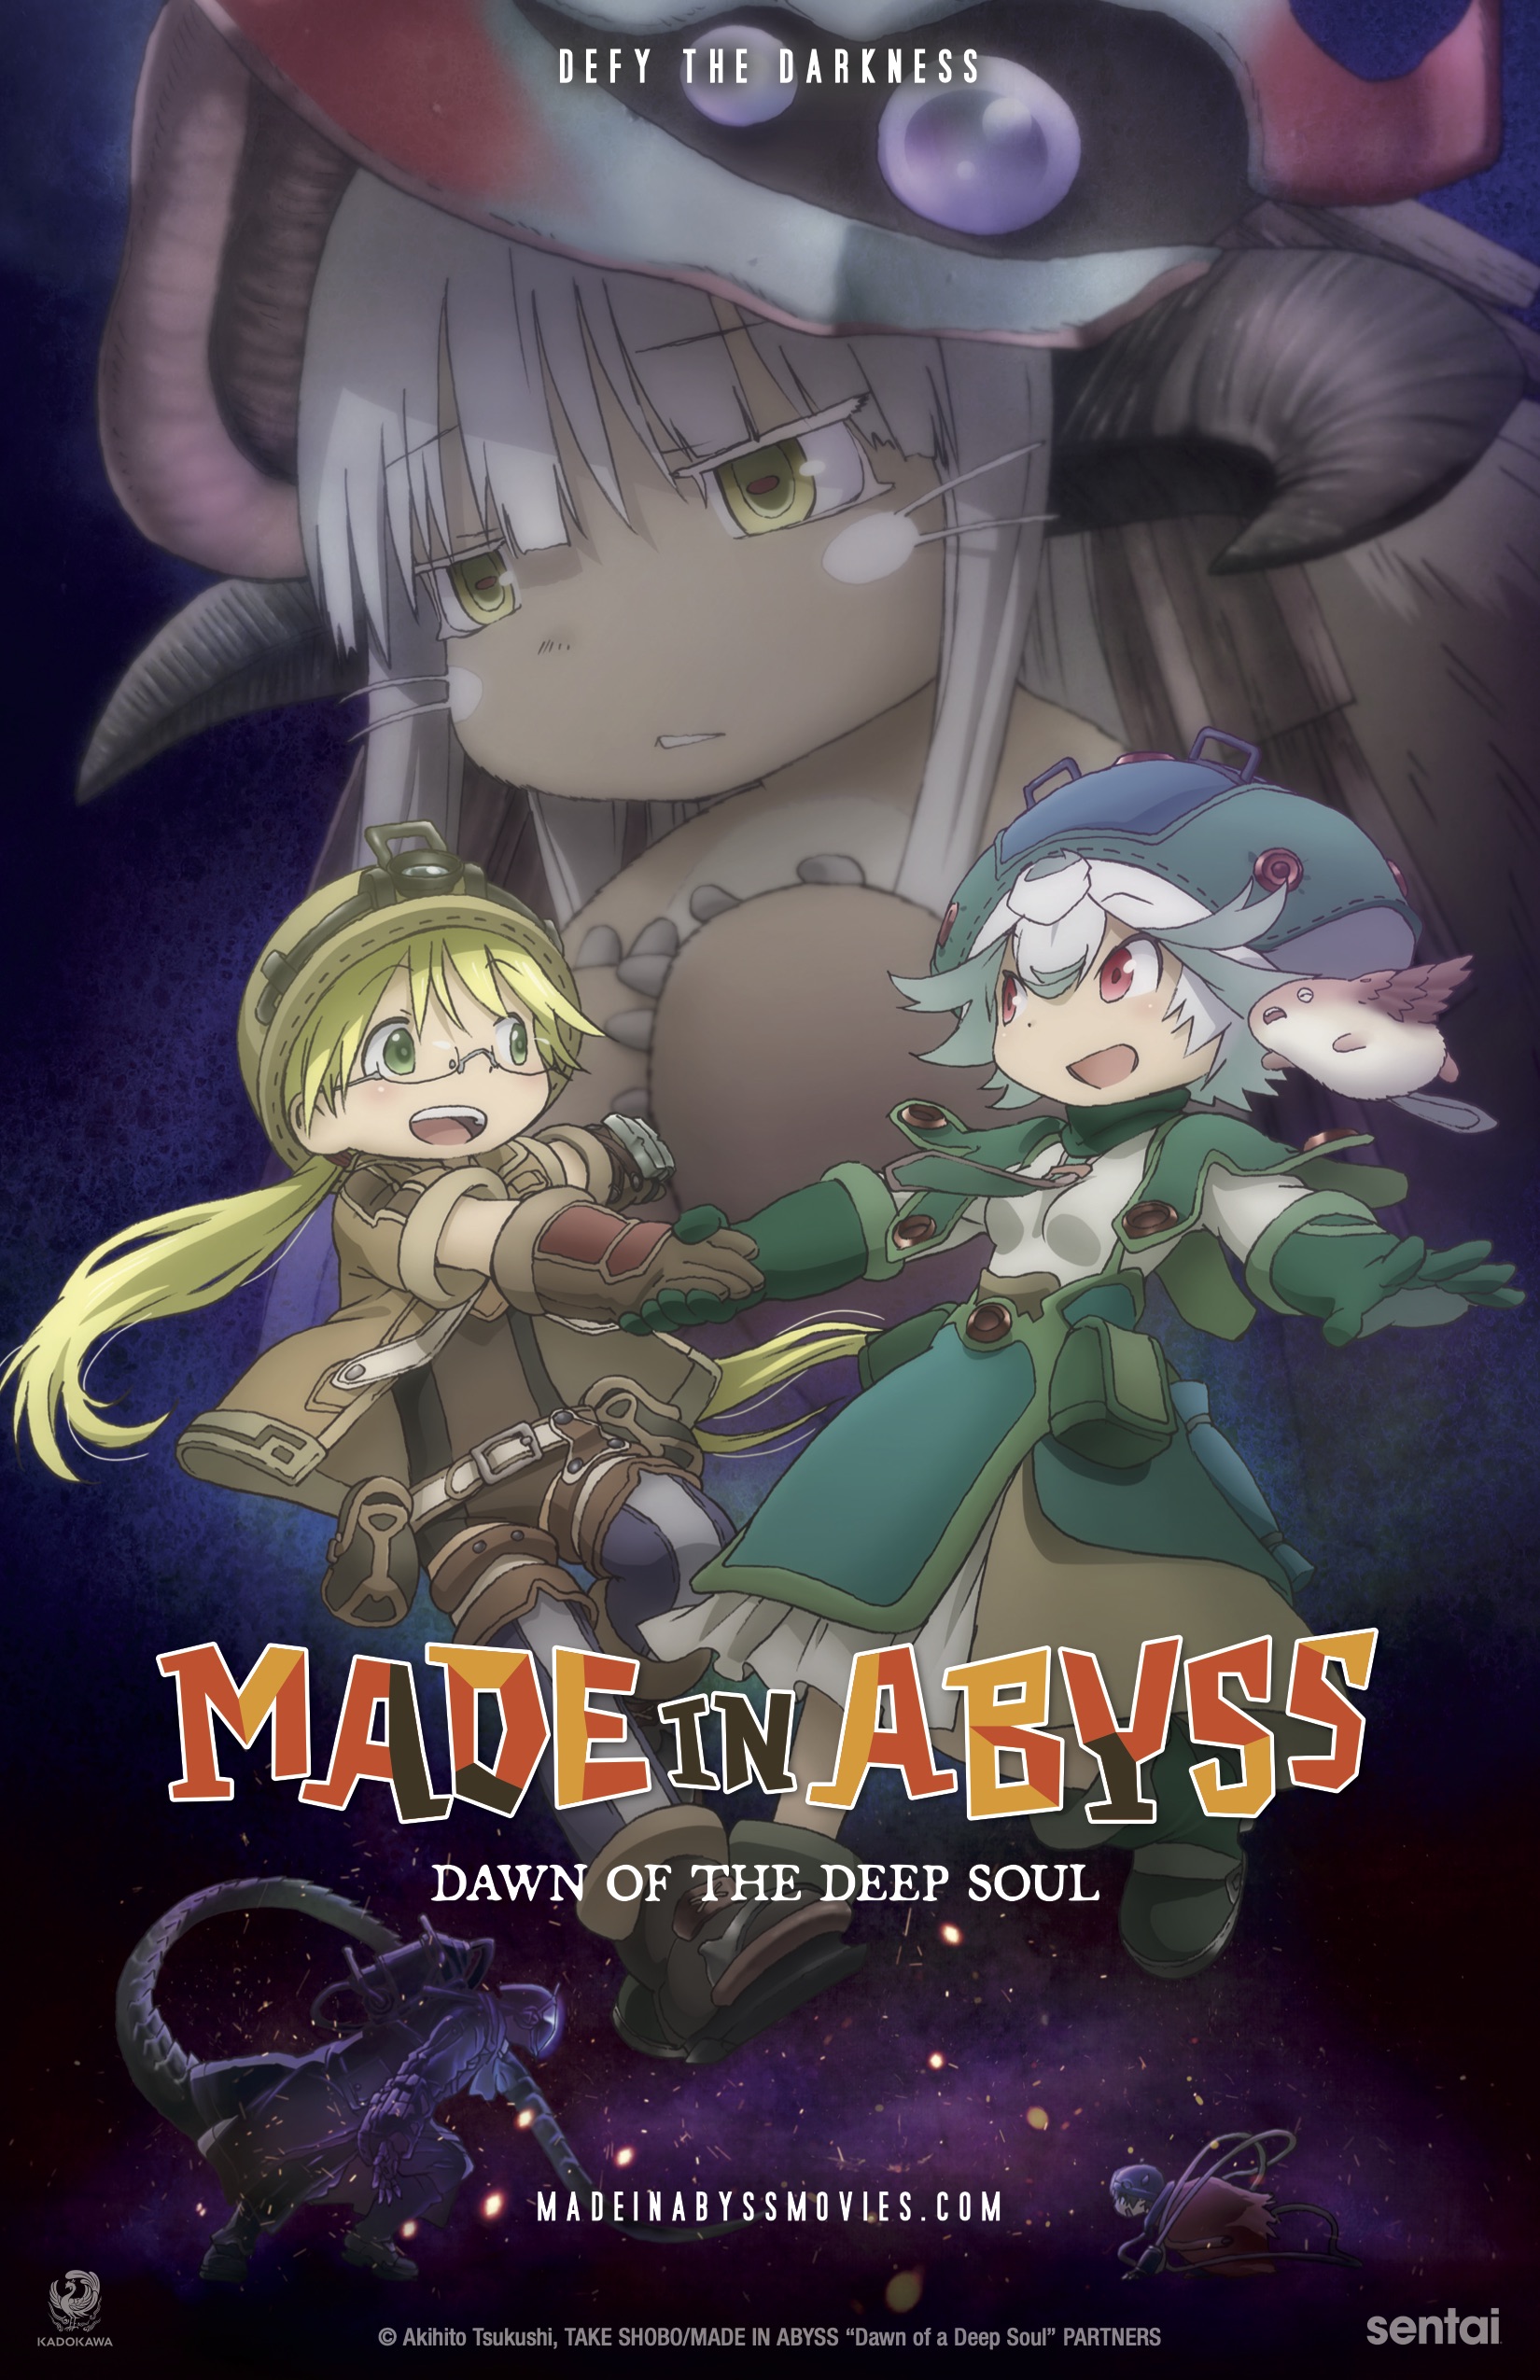 Made in Abyss: Journey's Dawn' Gets Limited US Release in March